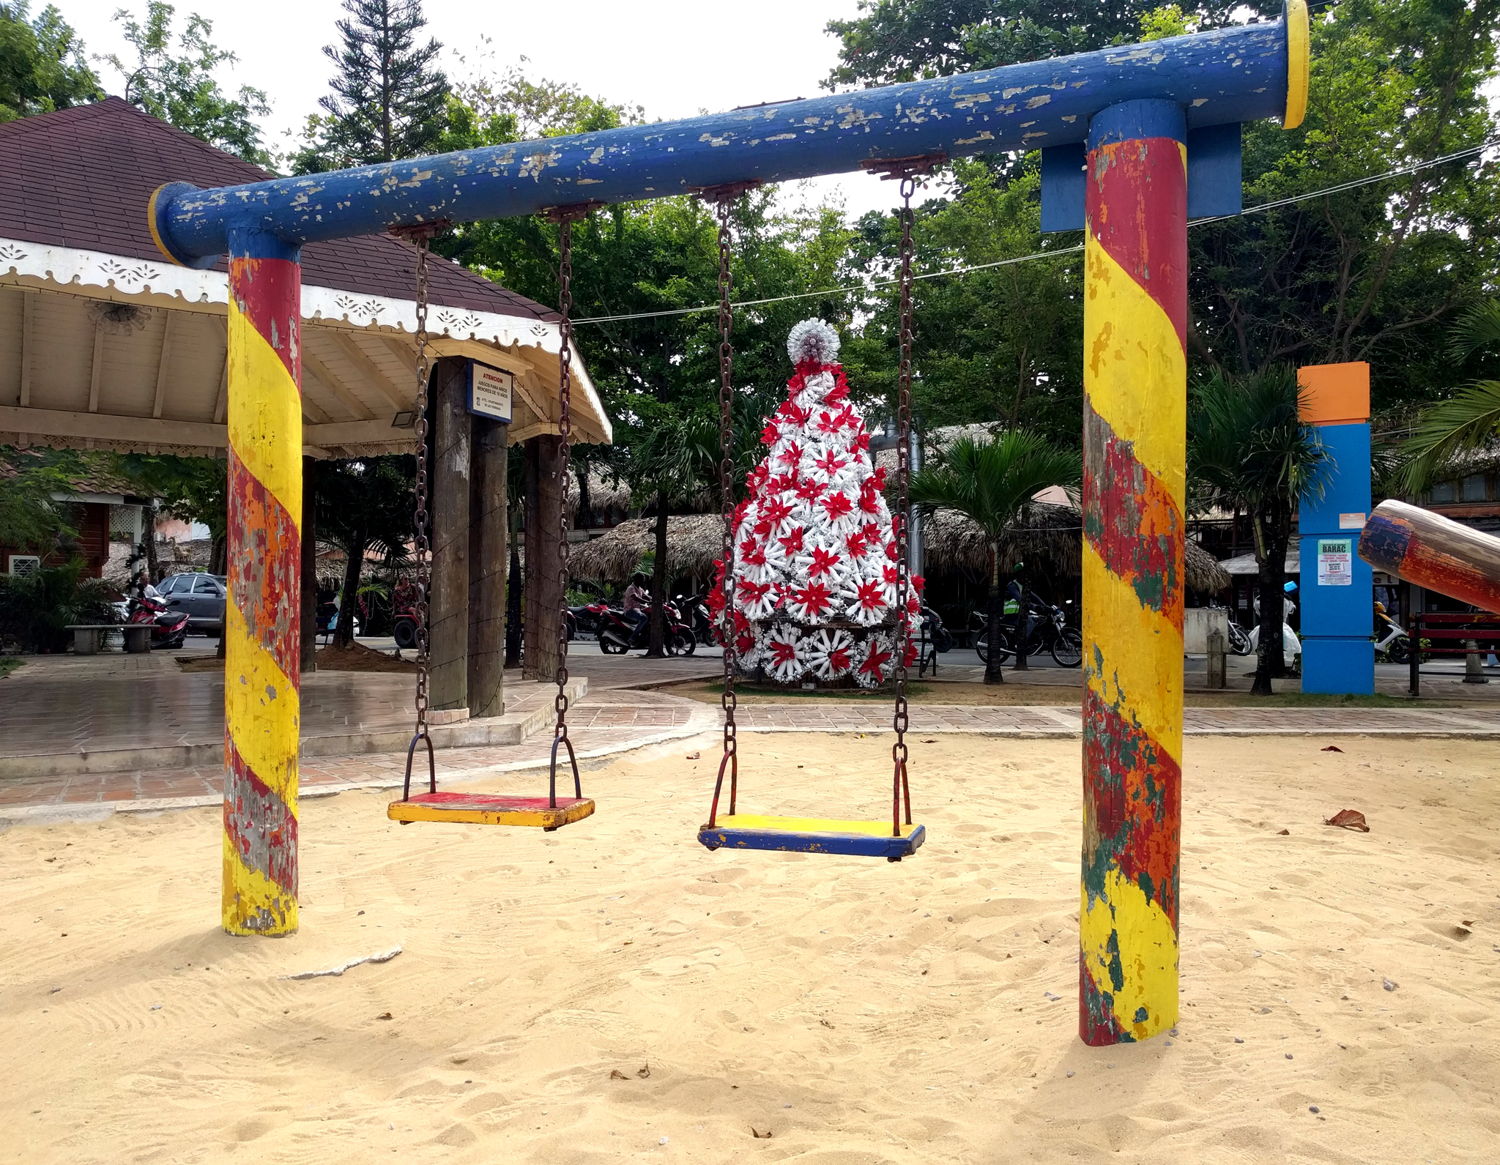 A Christmas tree made with plastic bottles, behind a swingset